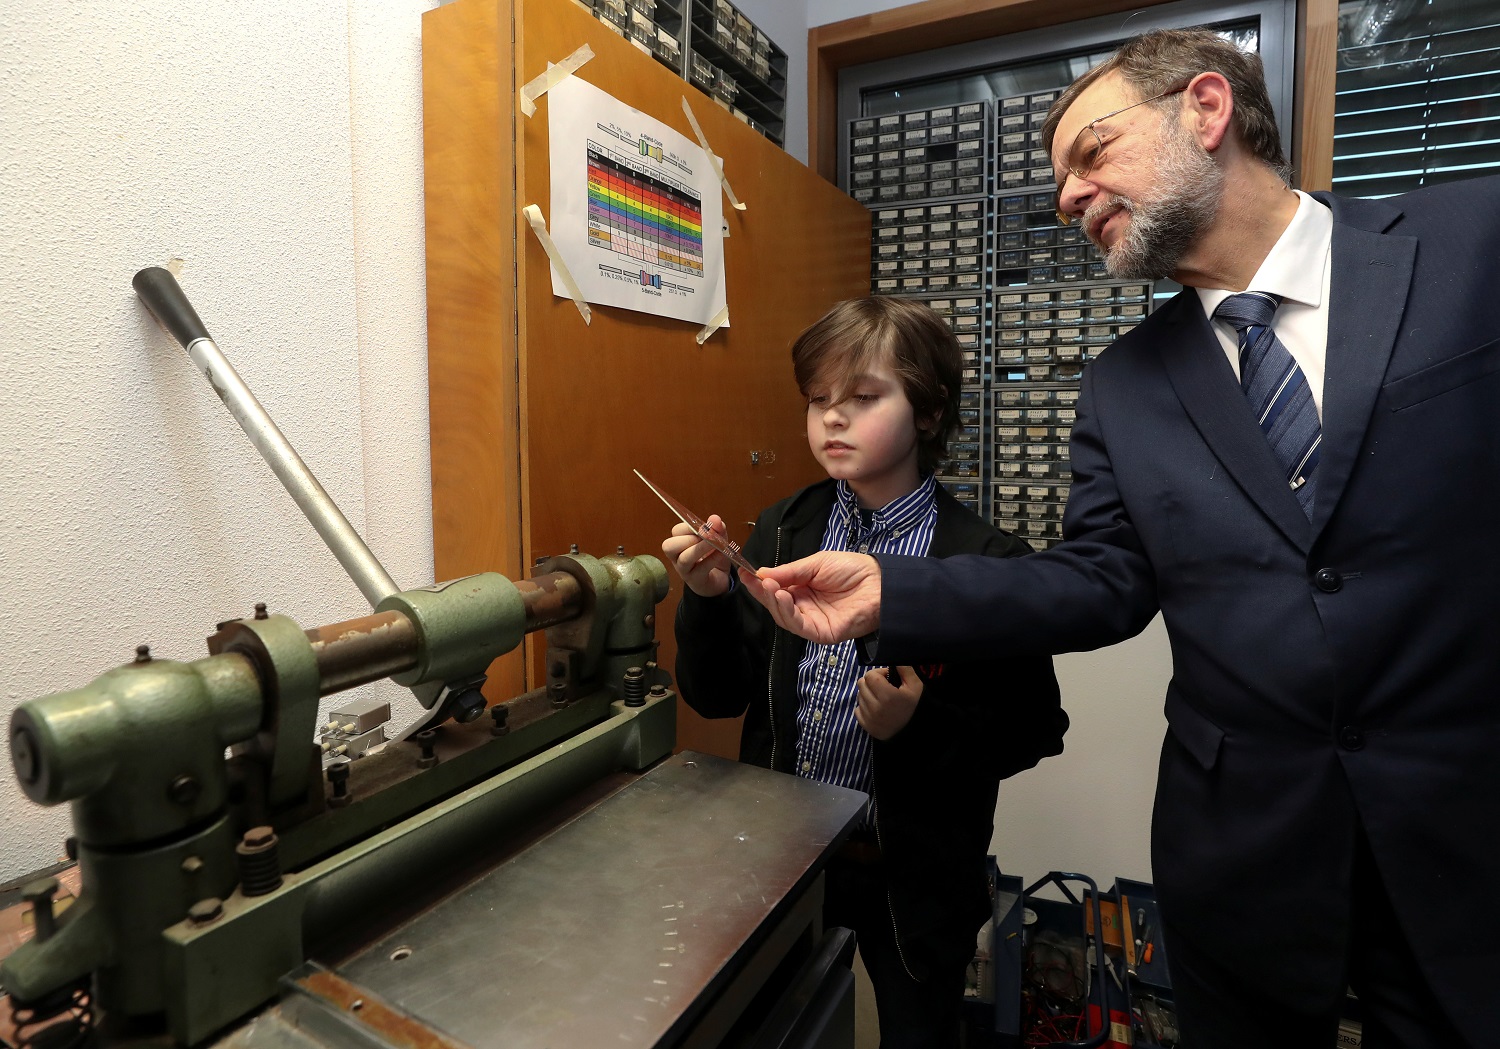 9-year old Belgian boy Laurent Simons on track to become world's youngest university graduate